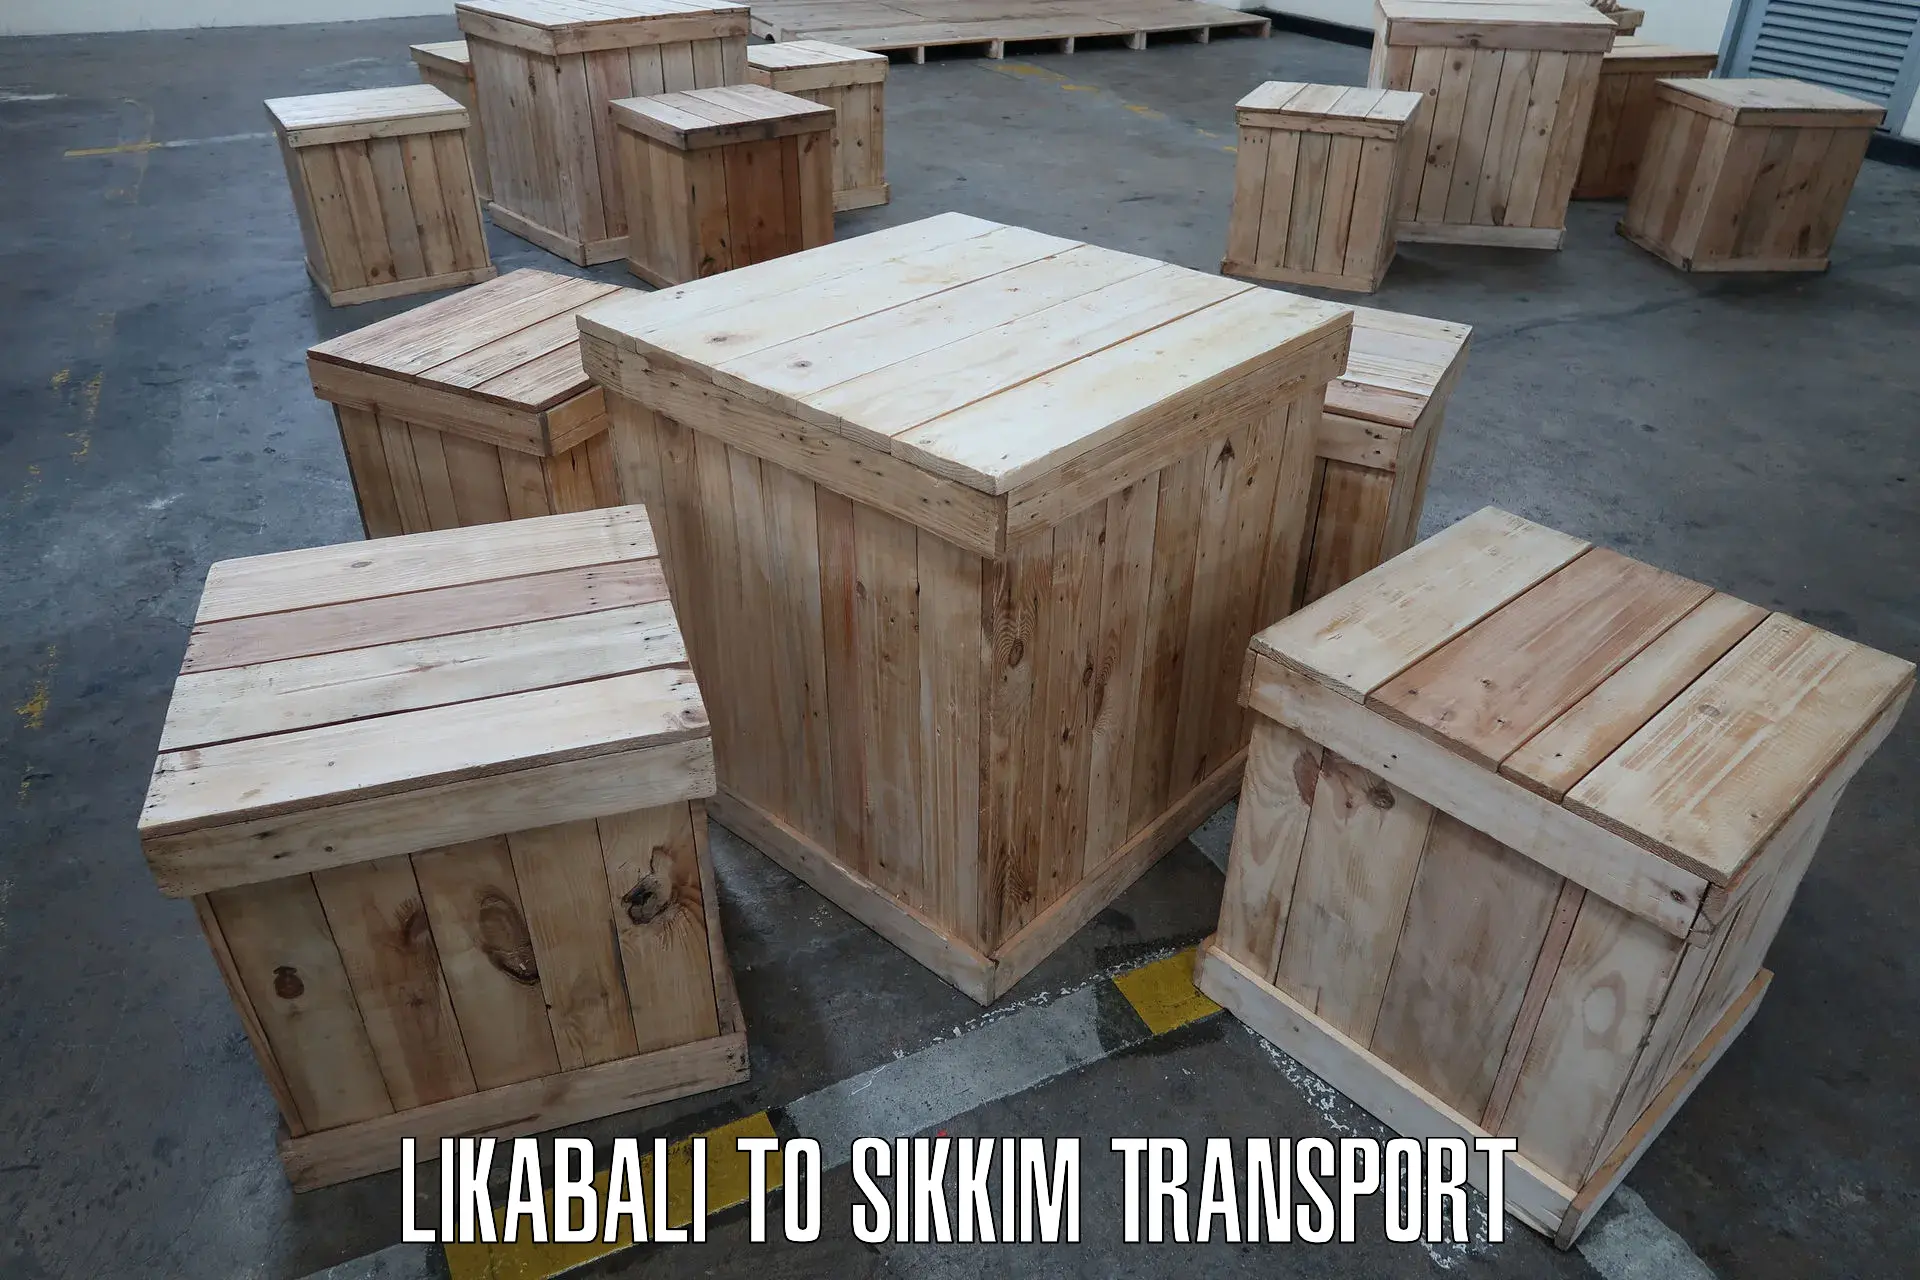 Transport in sharing in Likabali to Sikkim